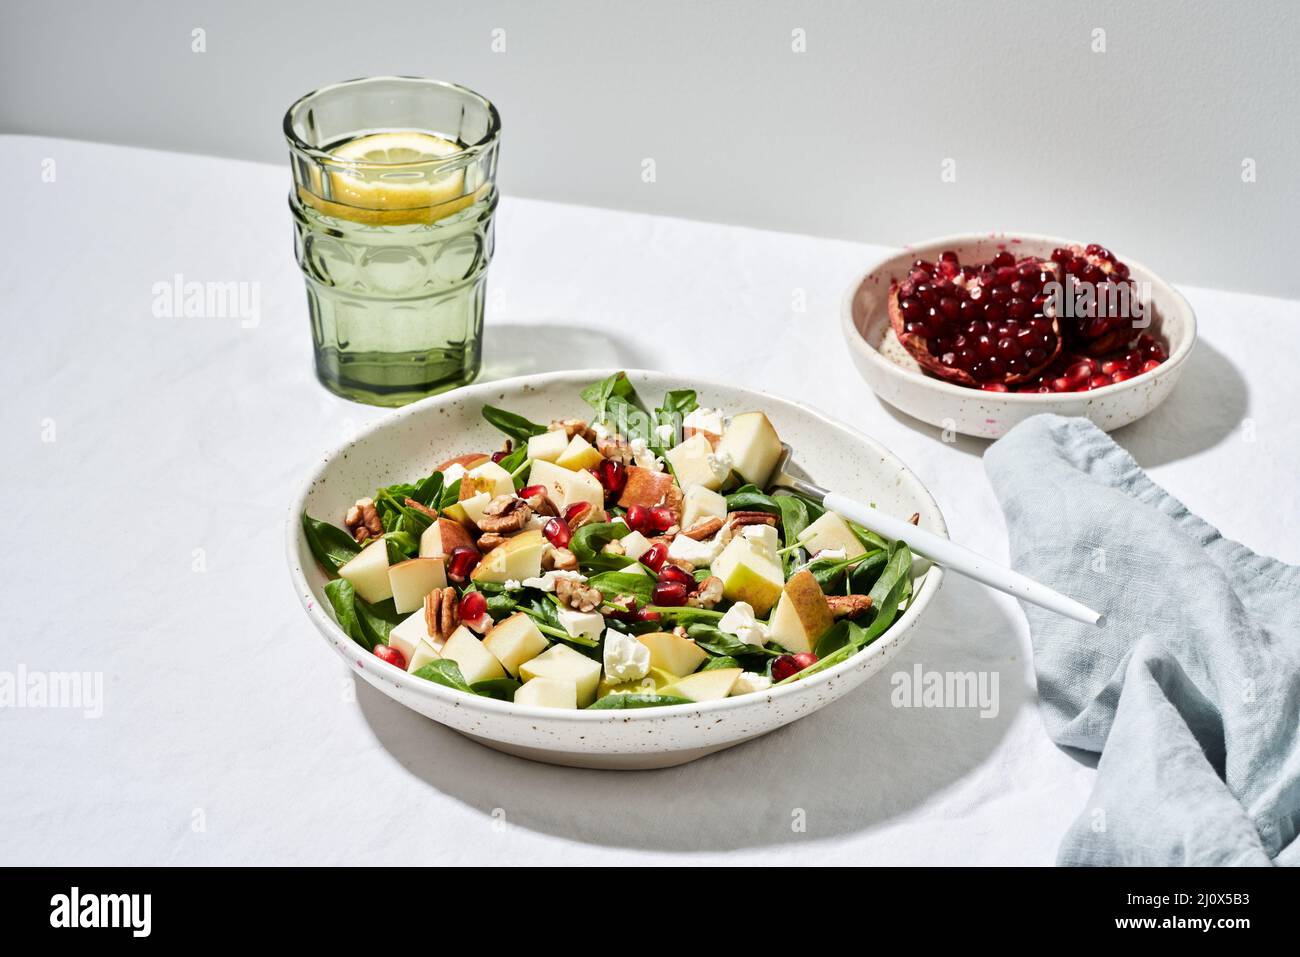 Hard light, Fruits salad with nuts, balanced food, clean eating. Spinach with apples Stock Photo